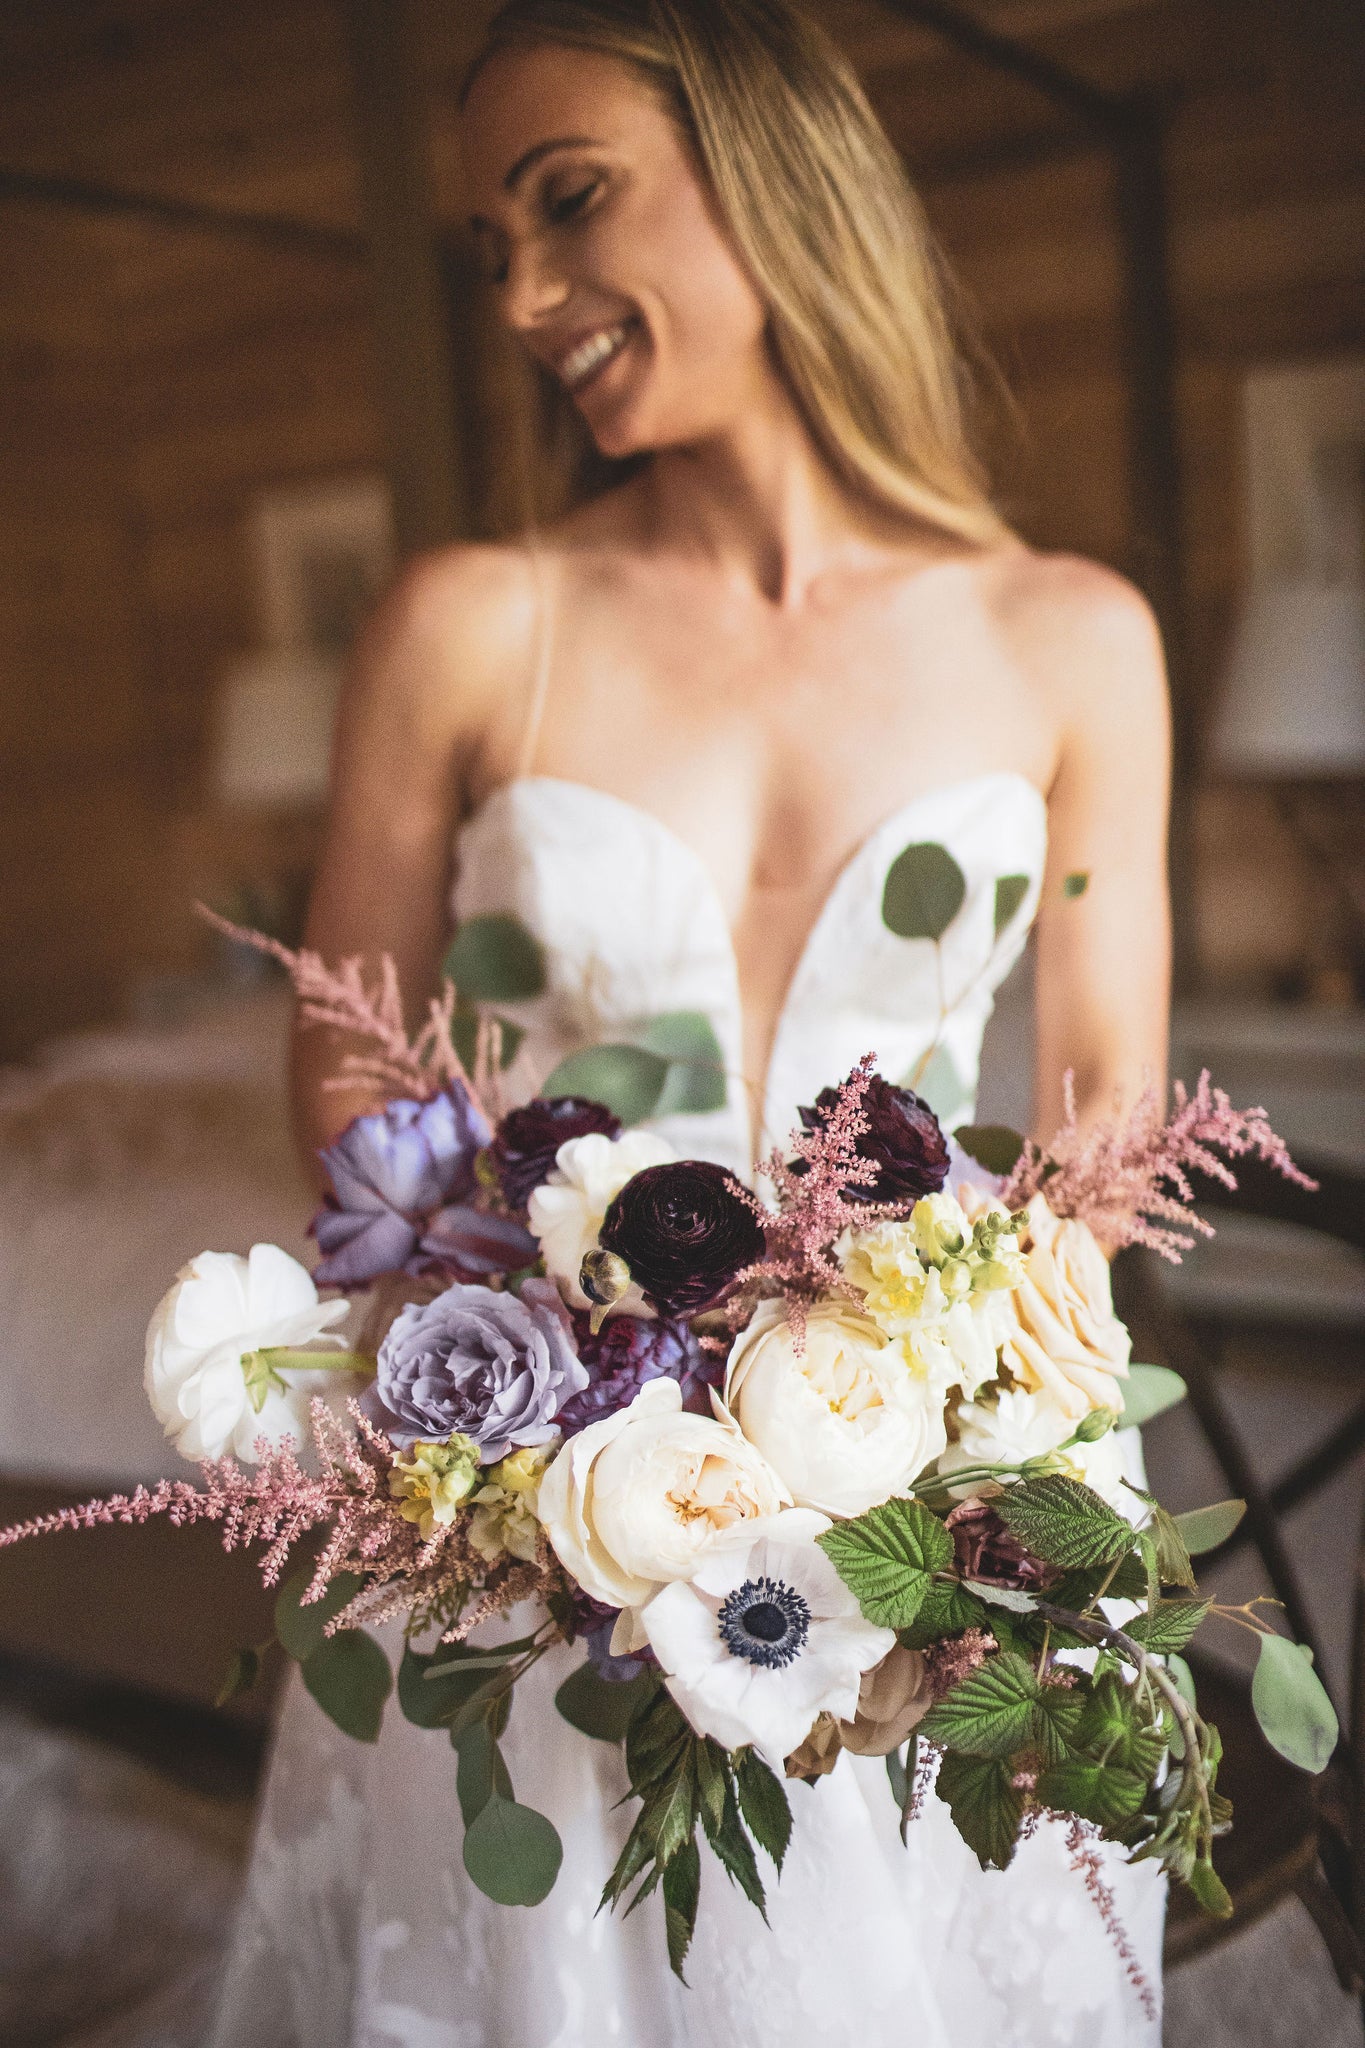 Bride holding bouquet of white and lavender blooms